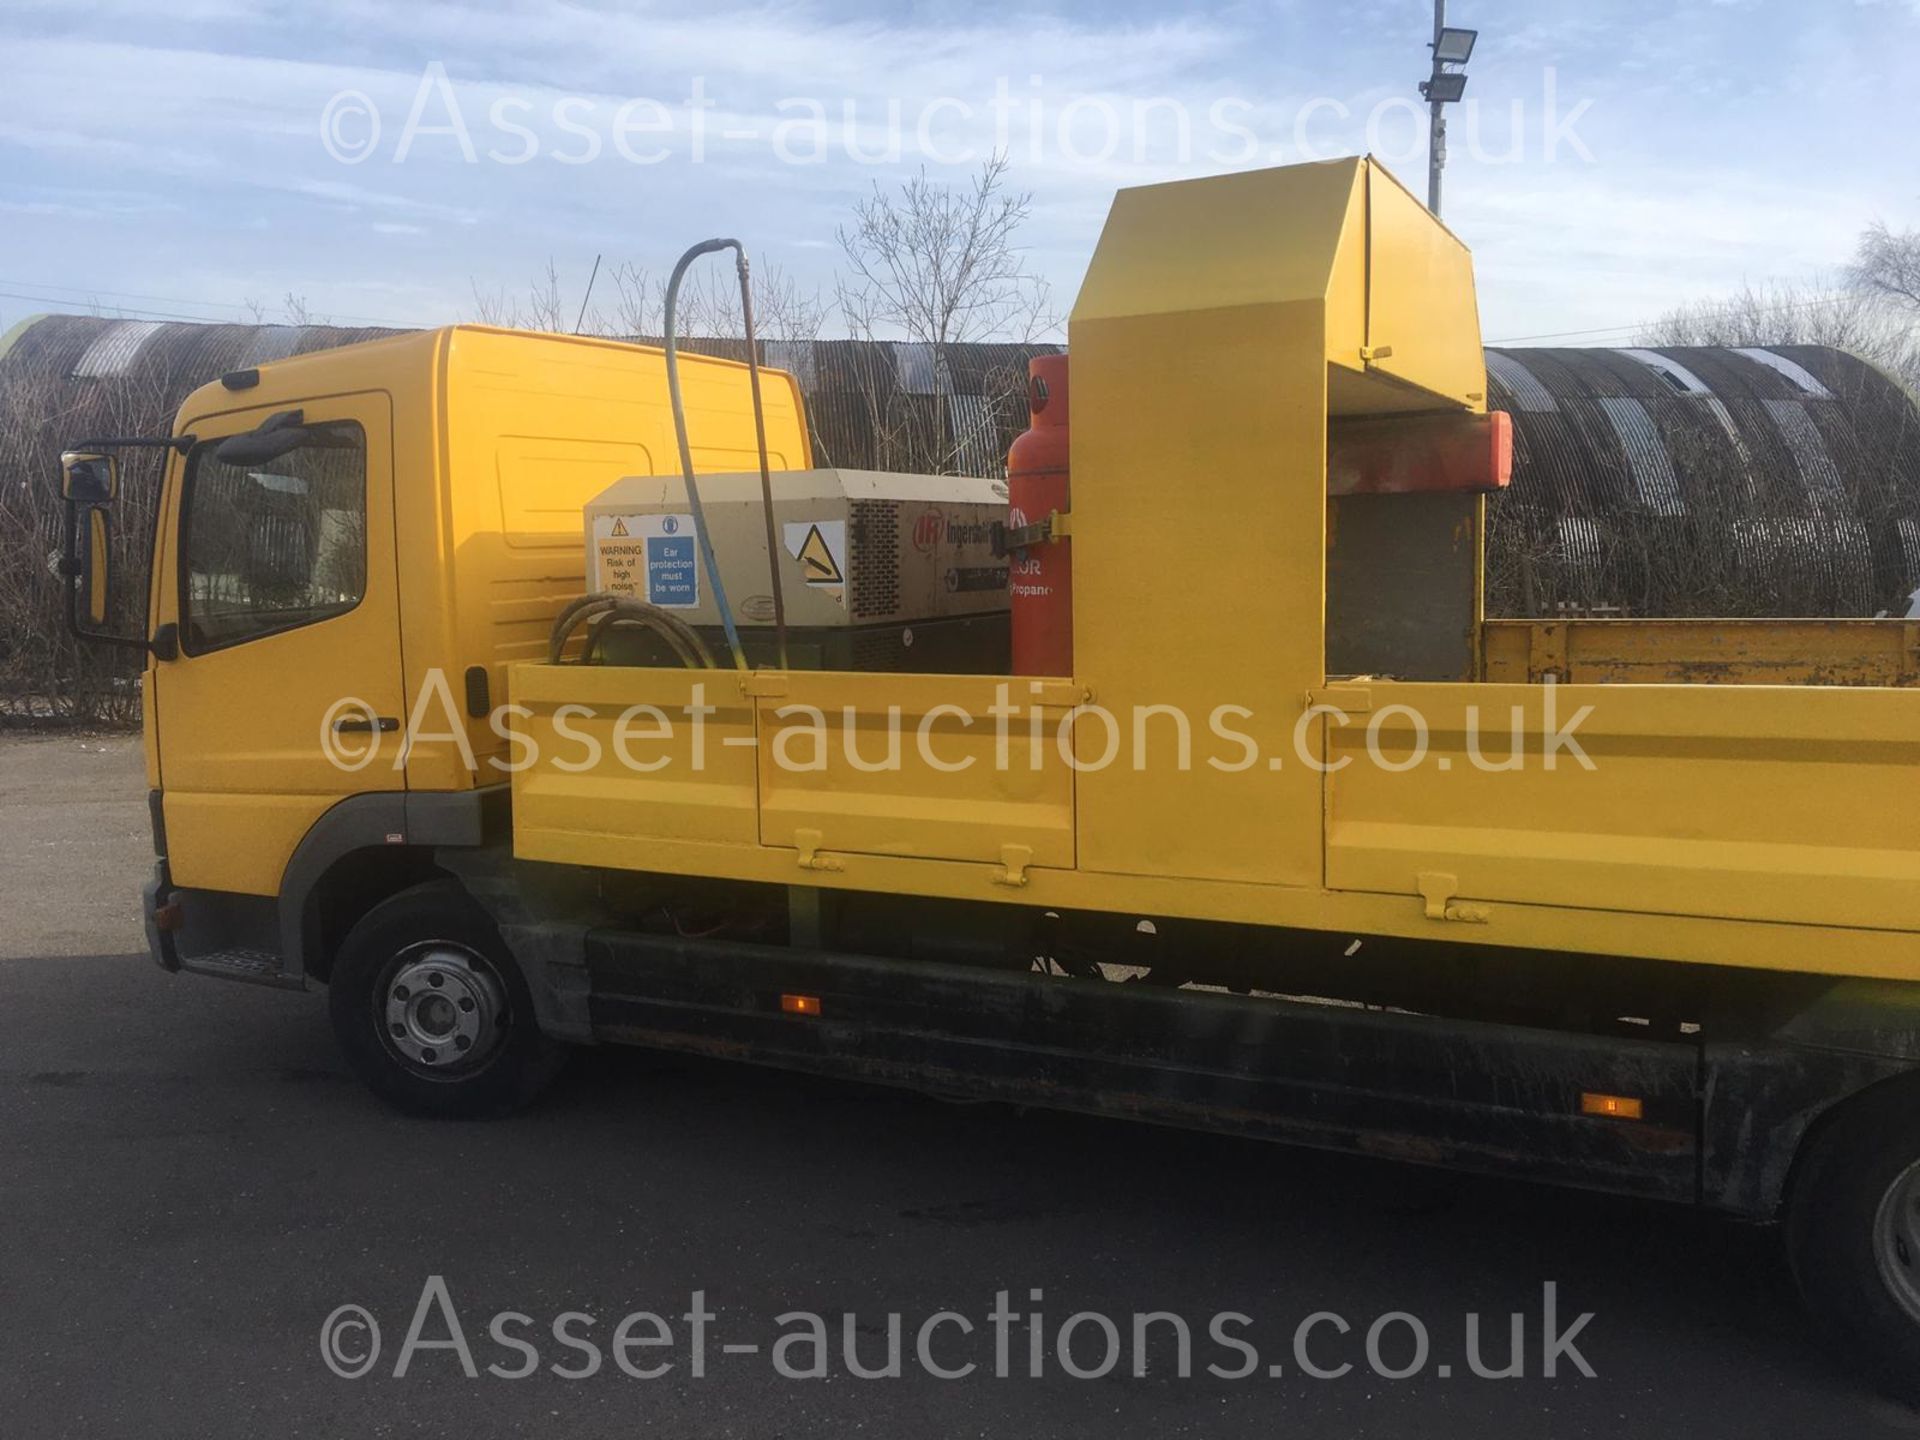 2004/54 REG MERCEDES ATEGO 1018 DAY YELLOW DROPSIDE LINE PAINTING LORRY 4.3L DIESEL ENGINE *NO VAT* - Image 11 of 128